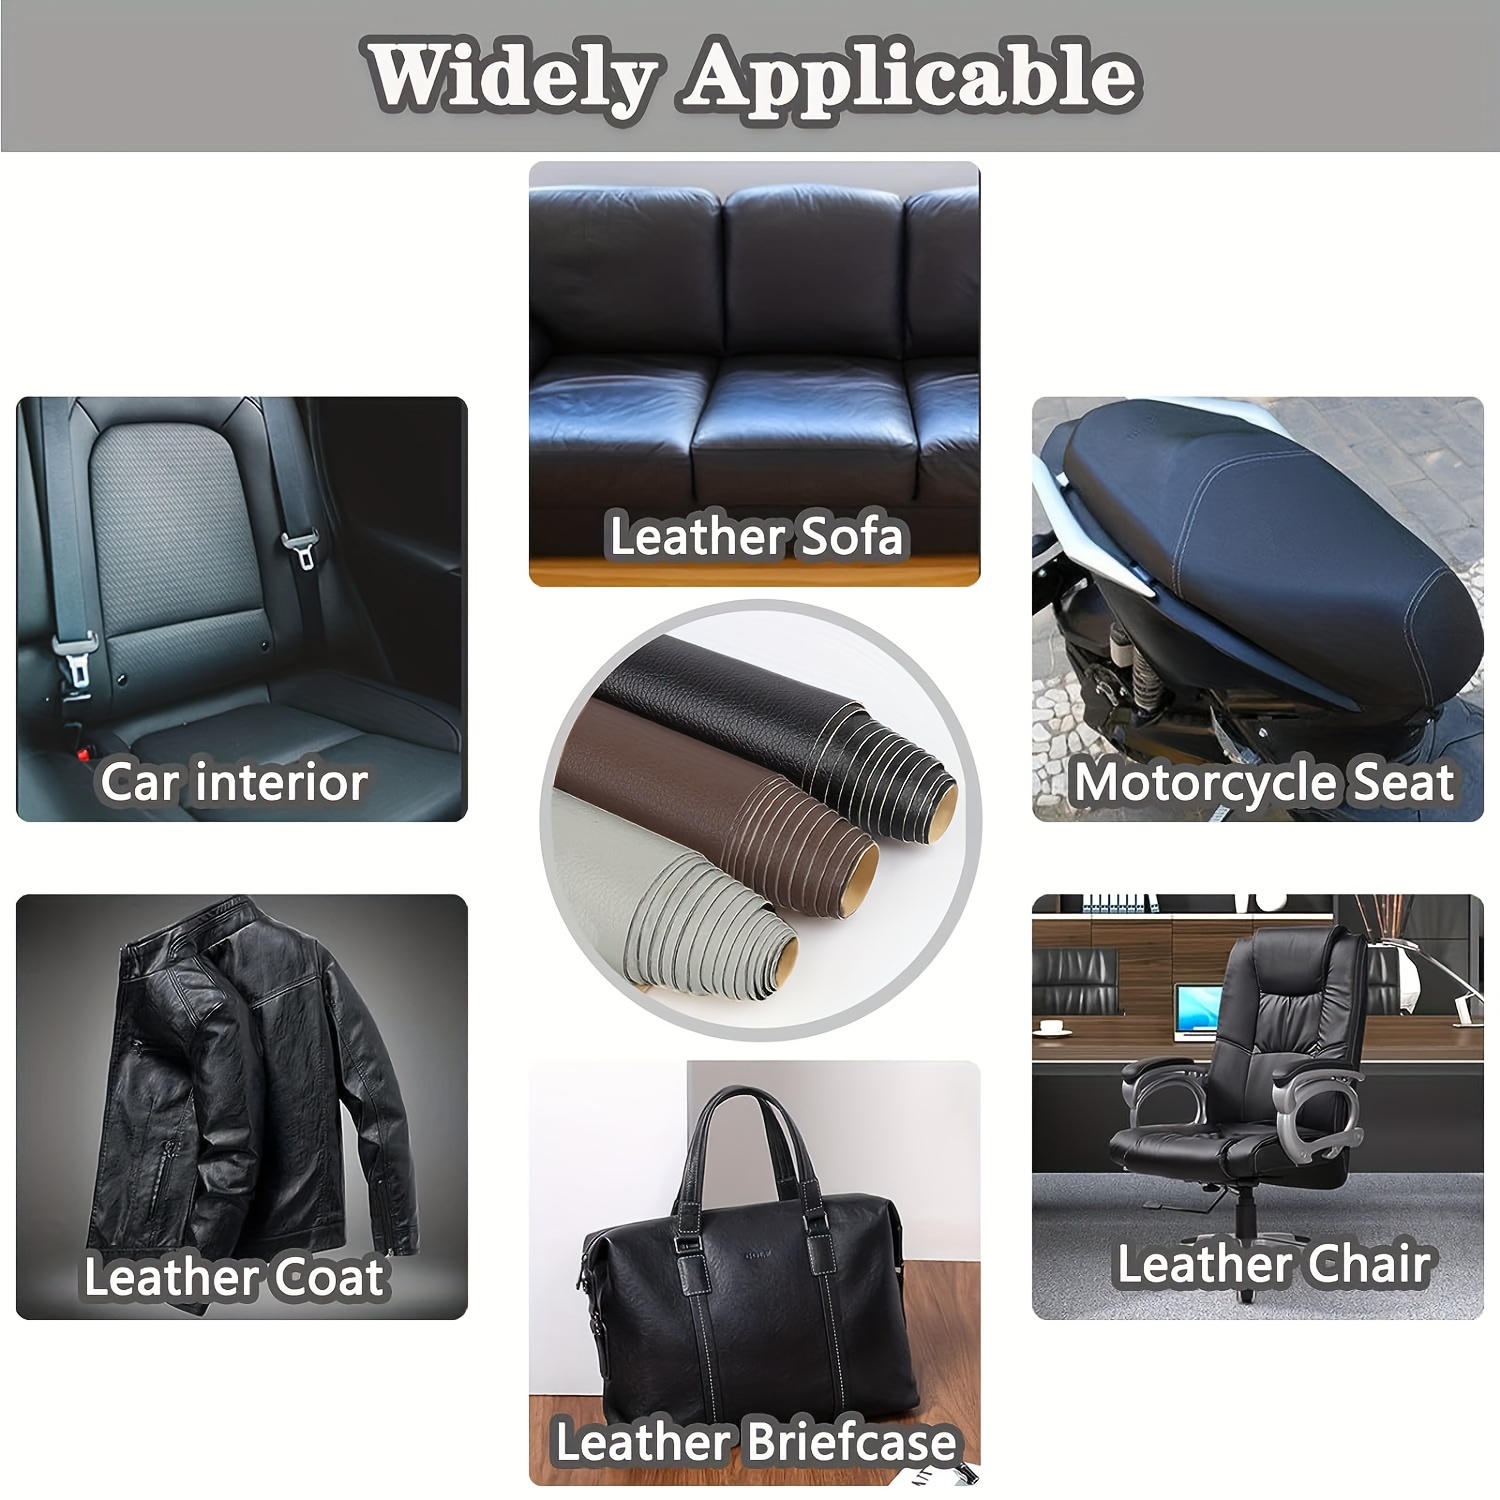 Vinyl / Leather Seat Adhesive Patch 